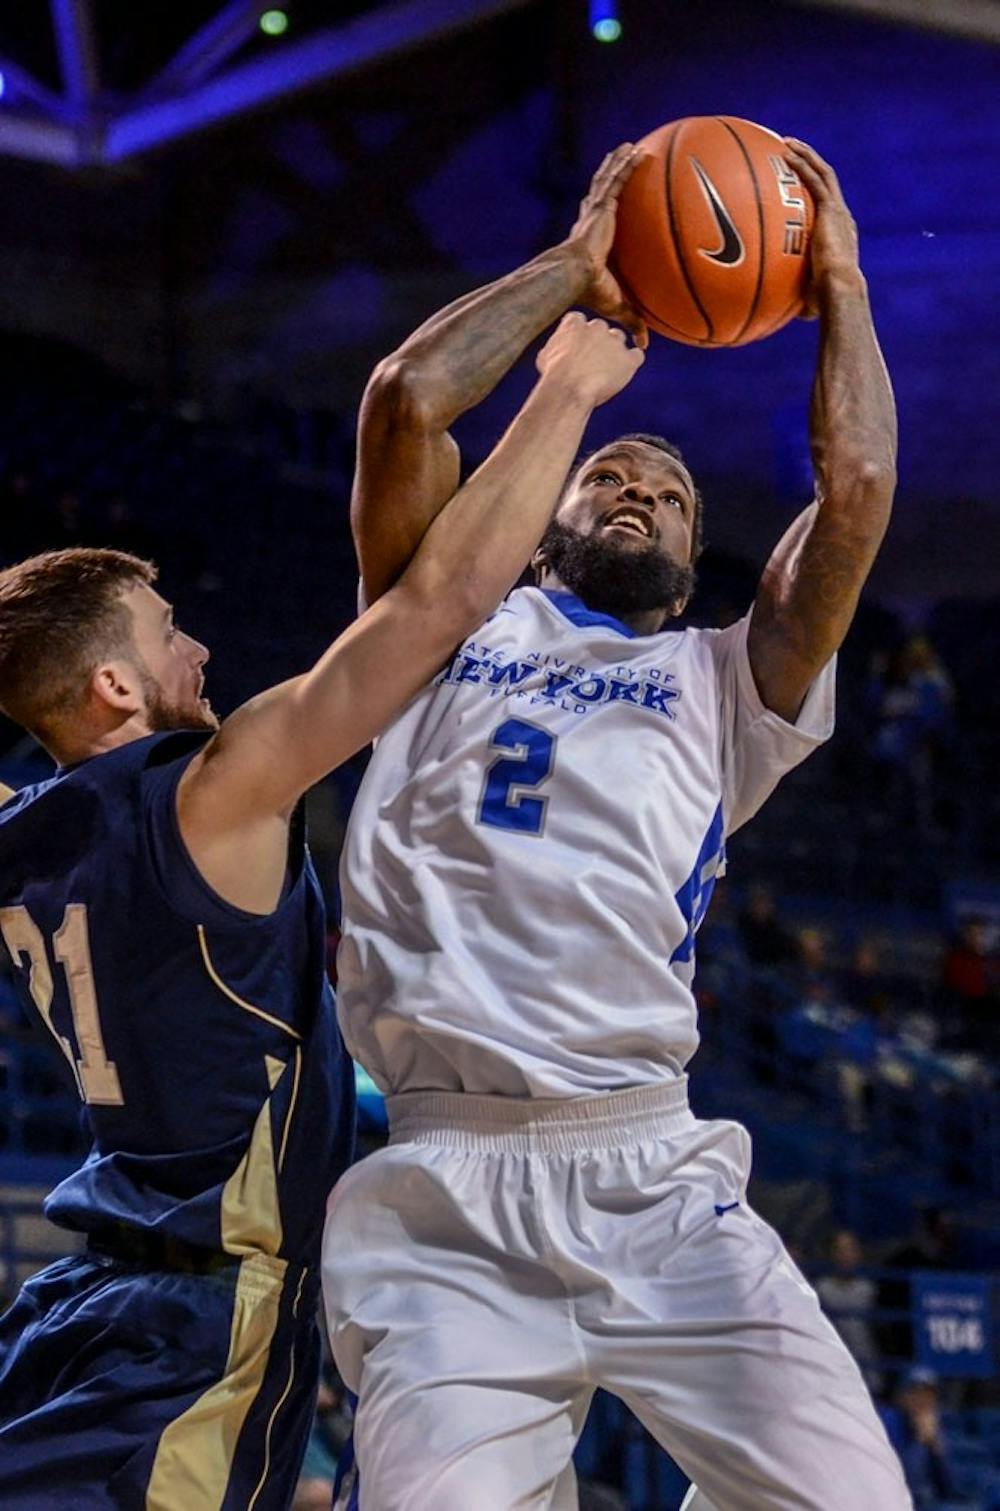 <p>Willie Conner goes to the basket against Pittsburgh&nbsp;at Bradford in Buffalo's season-opening game in November. Conner had 23 points for the Bulls in their 99-79 victory over Delaware at Alumni Arena Tuesday night.&nbsp;</p>